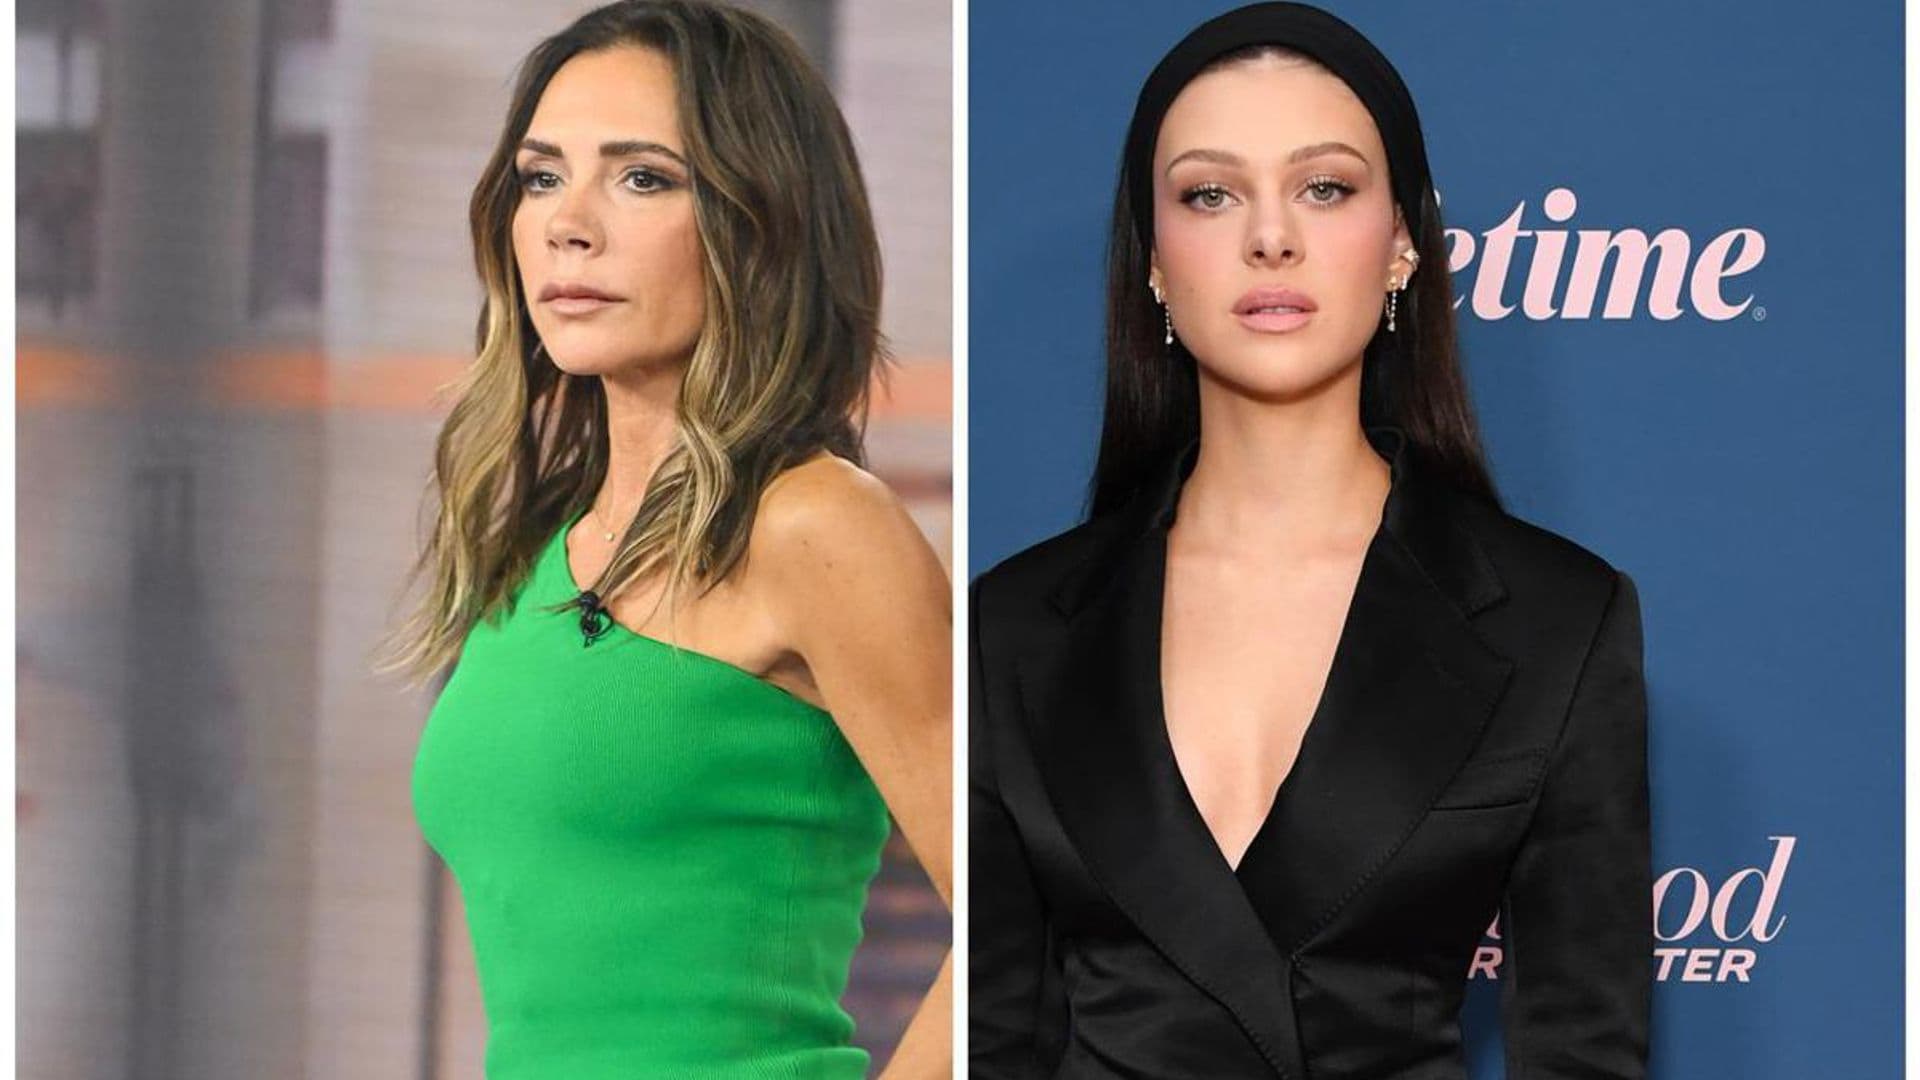 Victoria Beckham dances with Nicola Peltz while on family vacation following feud: ‘Fun in the Bahamas’